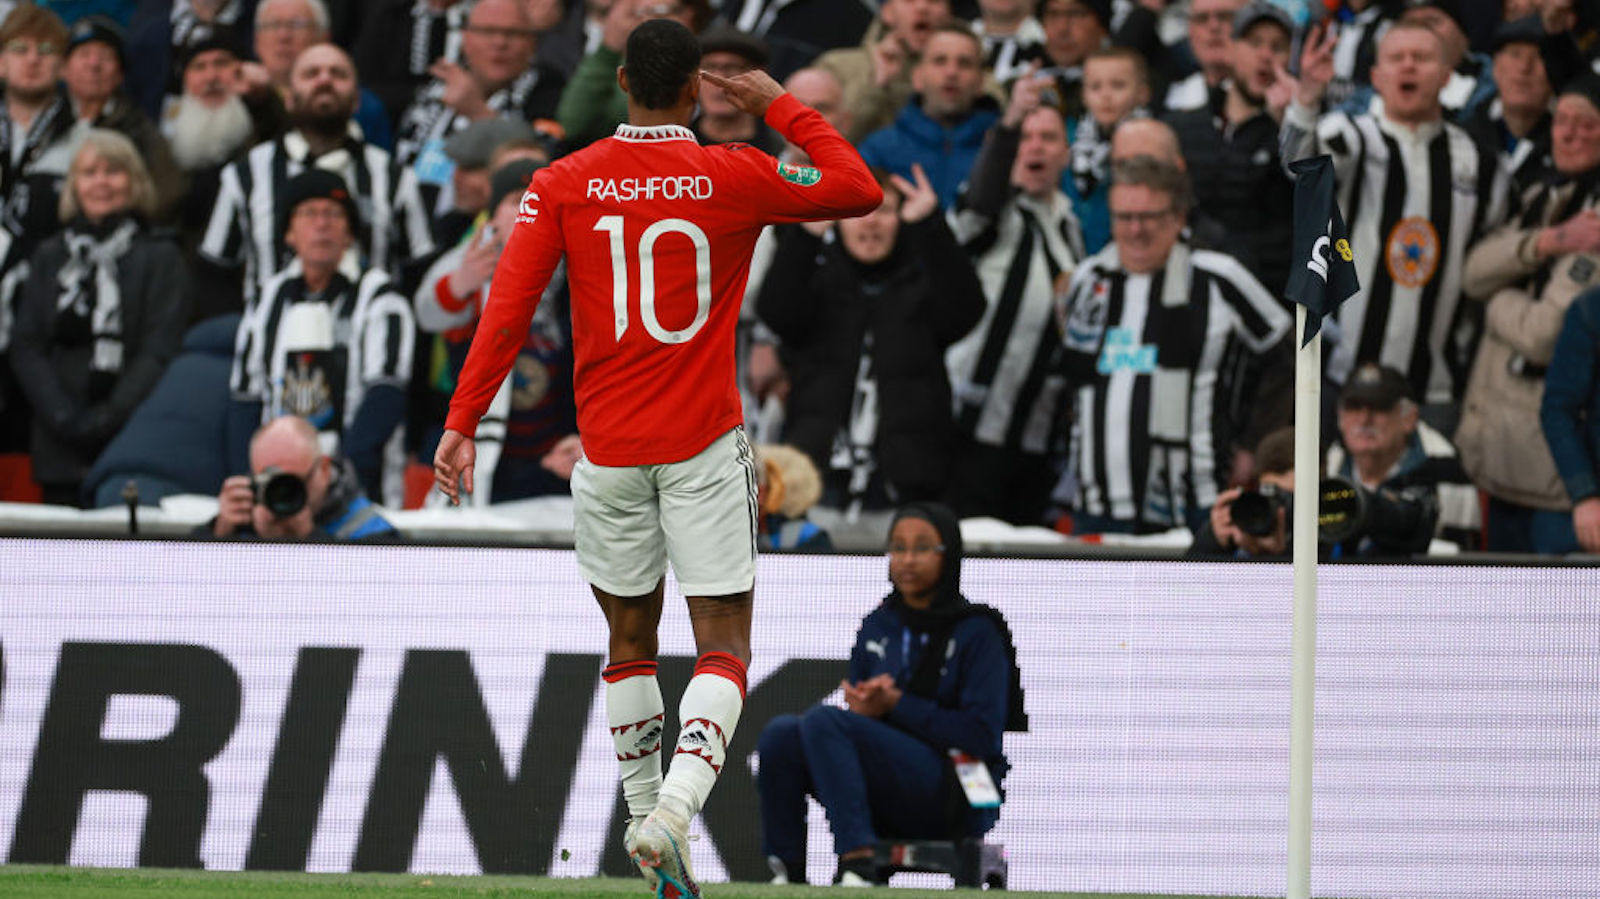 LONDON, ENGLAND - FEBRUARY 26: Marcus Rashford of Manchester United celebrates after scoring the team's second goal during the Carabao Cup Final match between Manchester United and Newcastle United at Wembley Stadium on February 26, 2023 in London, England.